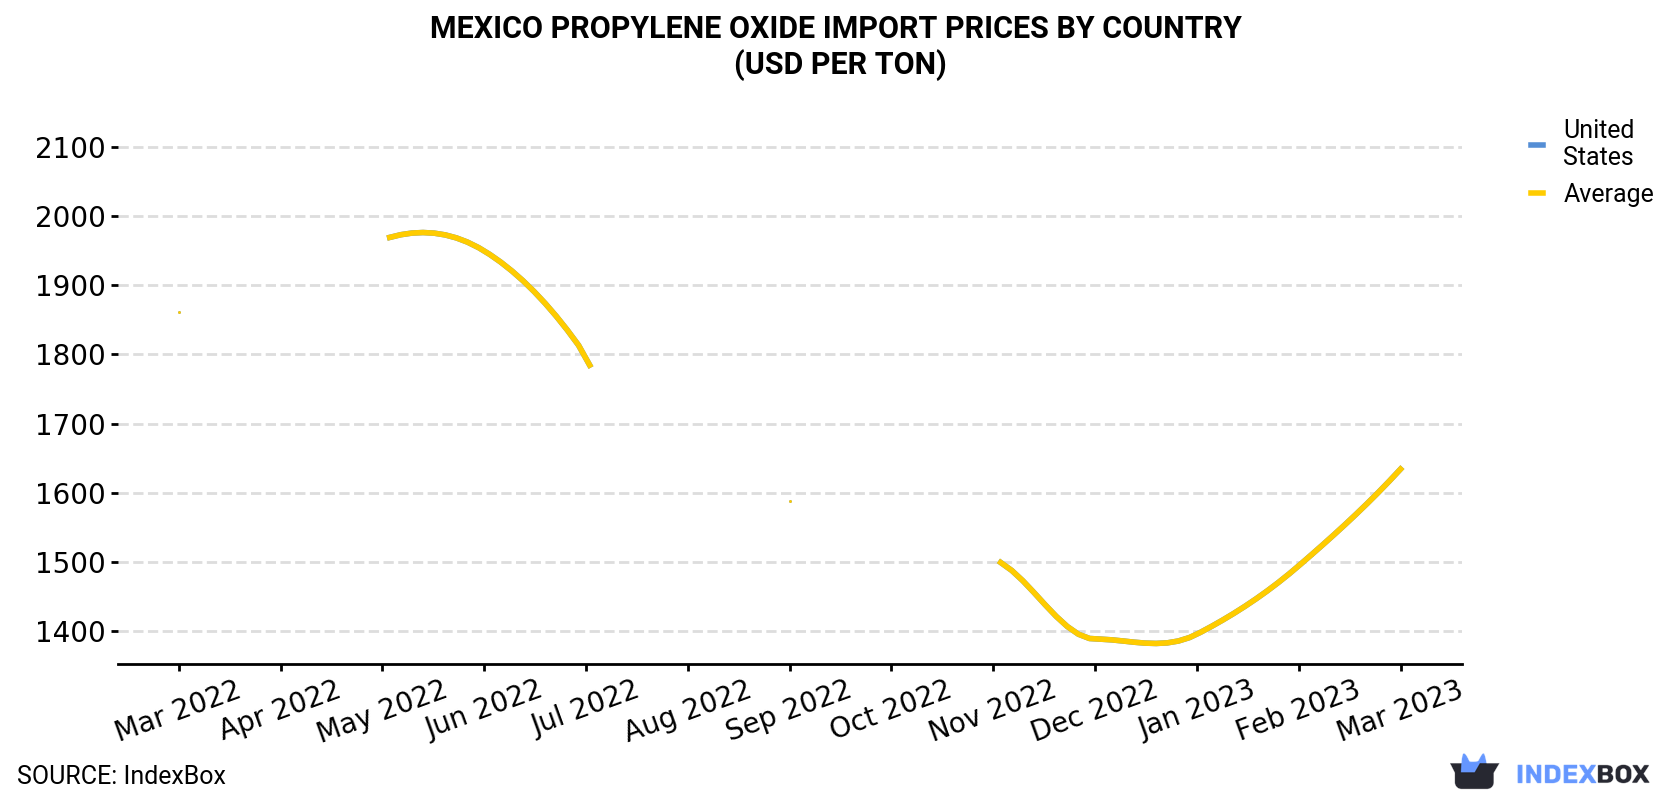 Mexico Propylene Oxide Import Prices By Country (USD Per Ton)